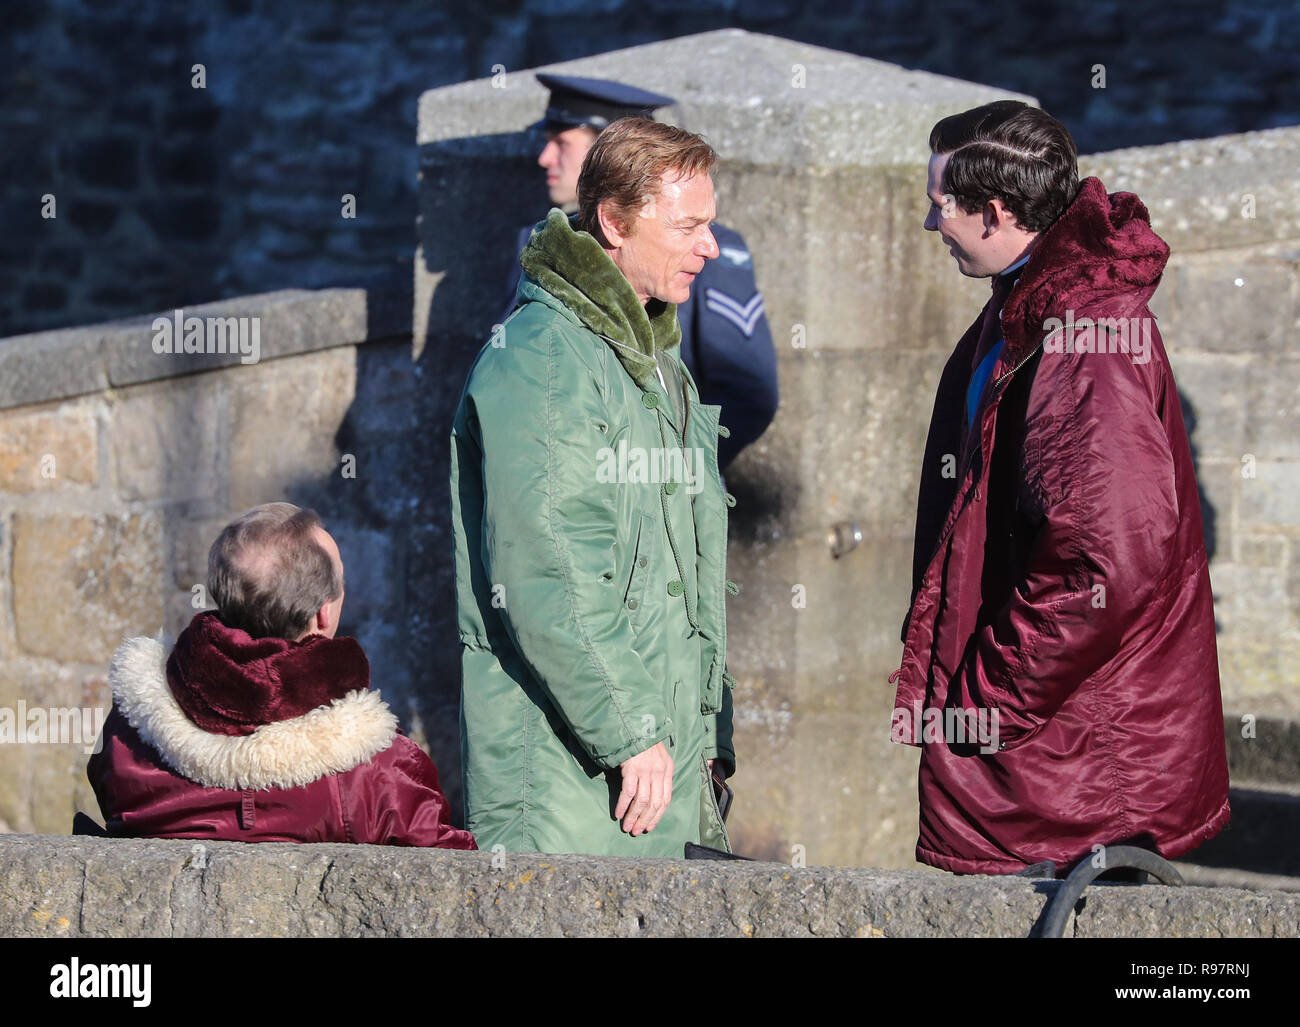 Josh O'Connor and Ben Daniels film a scene for the Netflix drama at Caernarfon Castle. Prince Charles is welcomed to Caernarfon Castle by Anthony Armstong-Jones, Lord Snowdon the Constable of Caernarfon Castle, ahead of his investiture.  Featuring: Ben Daniels, Josh O'Connor Where: Caernafon, Gwynedd, United Kingdom When: 18 Nov 2018 Credit: WENN.com Stock Photo